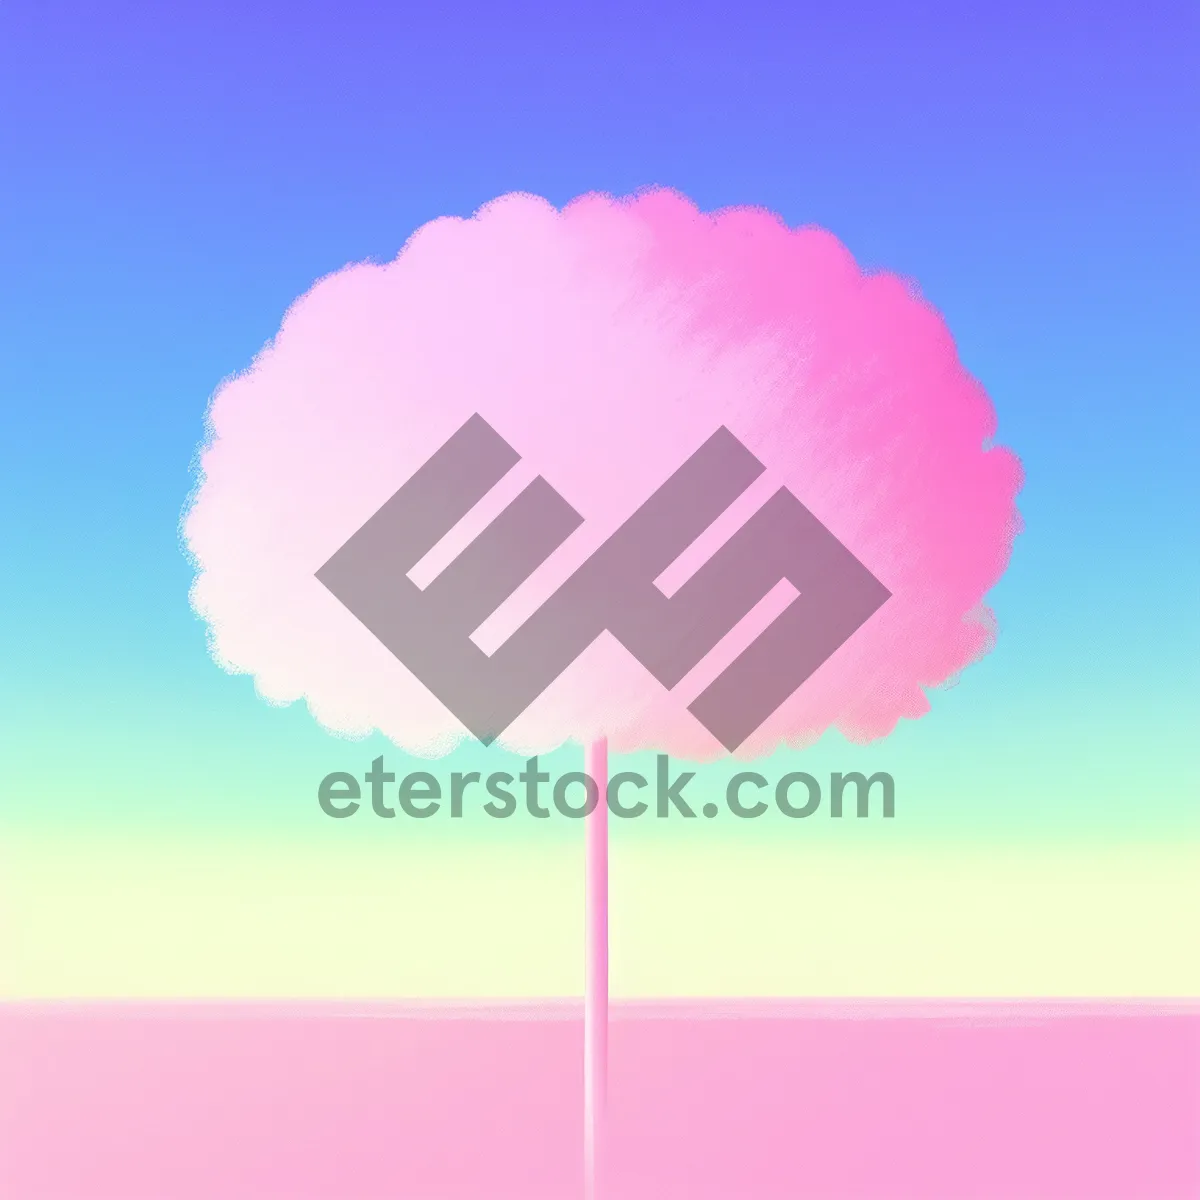 Picture of Pink Clouds: Artistic Design with Colorful Breeze